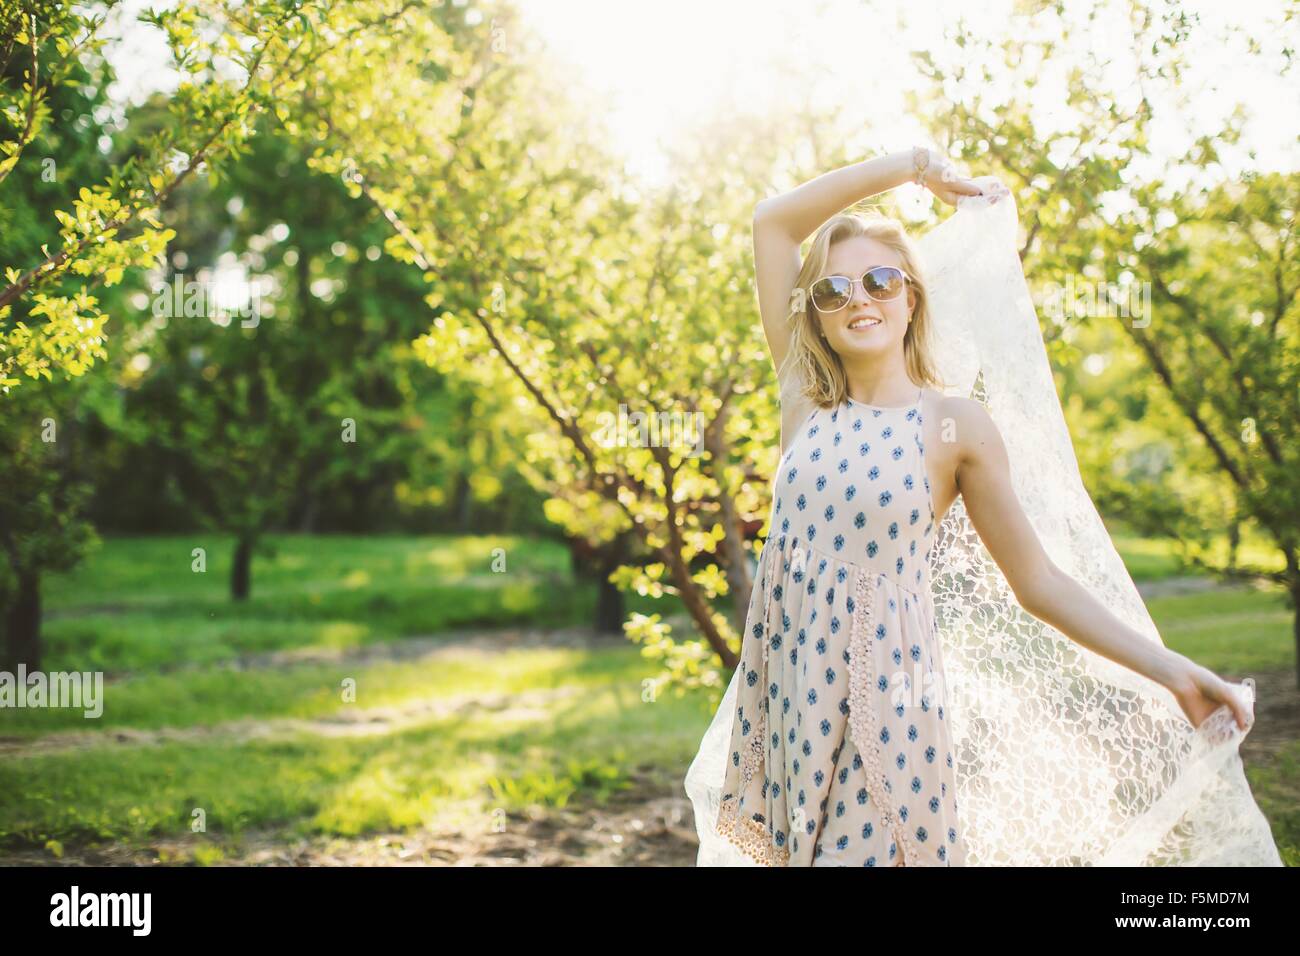 Young woman in orchard wearing sleeveless dress and sunglasses holding lace fabric, looking at camera smiling Stock Photo